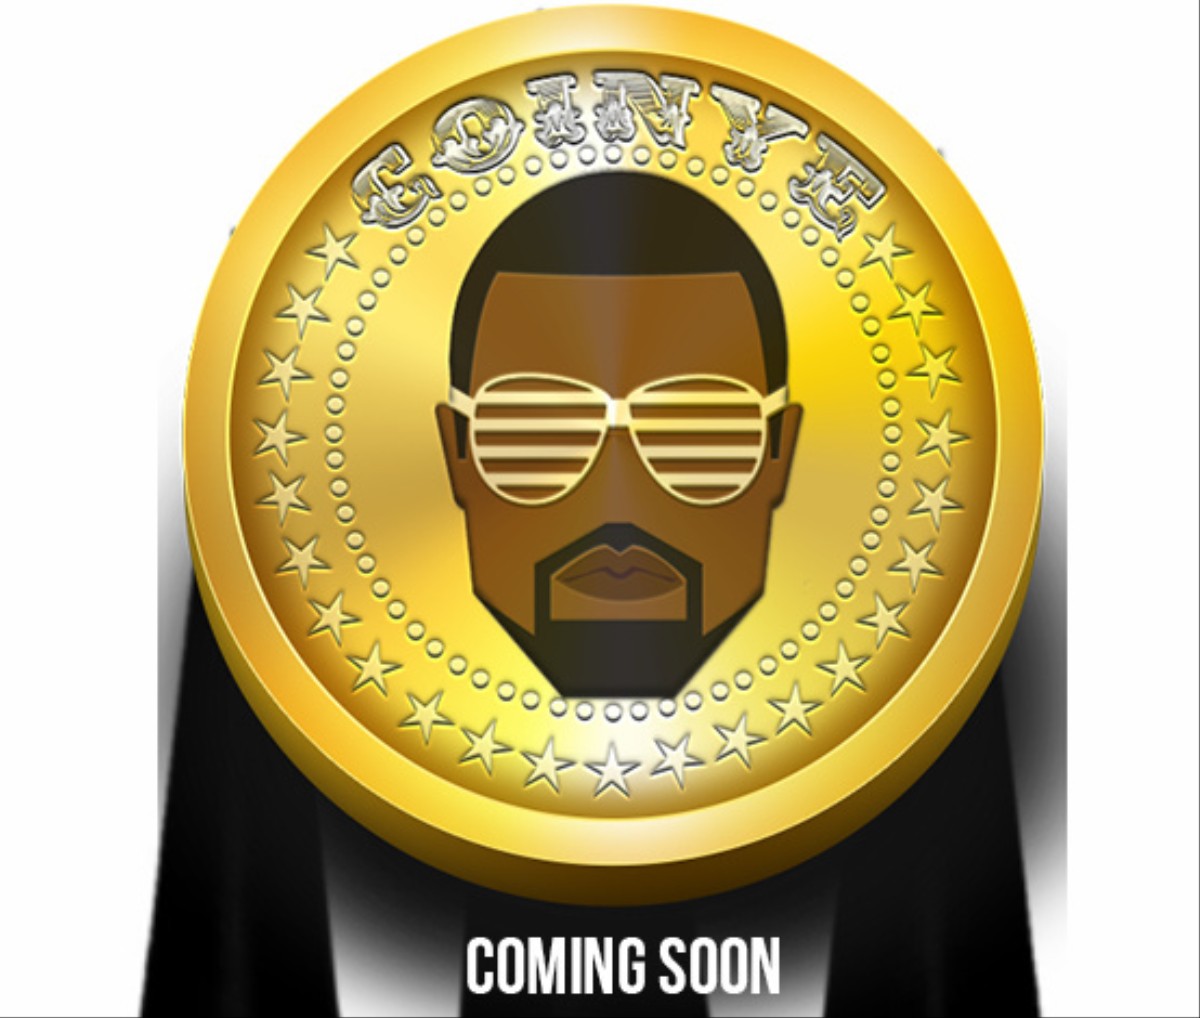 Vice Screw Bitcoin And Dogecoin There S A Kanye West Themed Cryptocurrency On The Way - roblox kanye west stronger